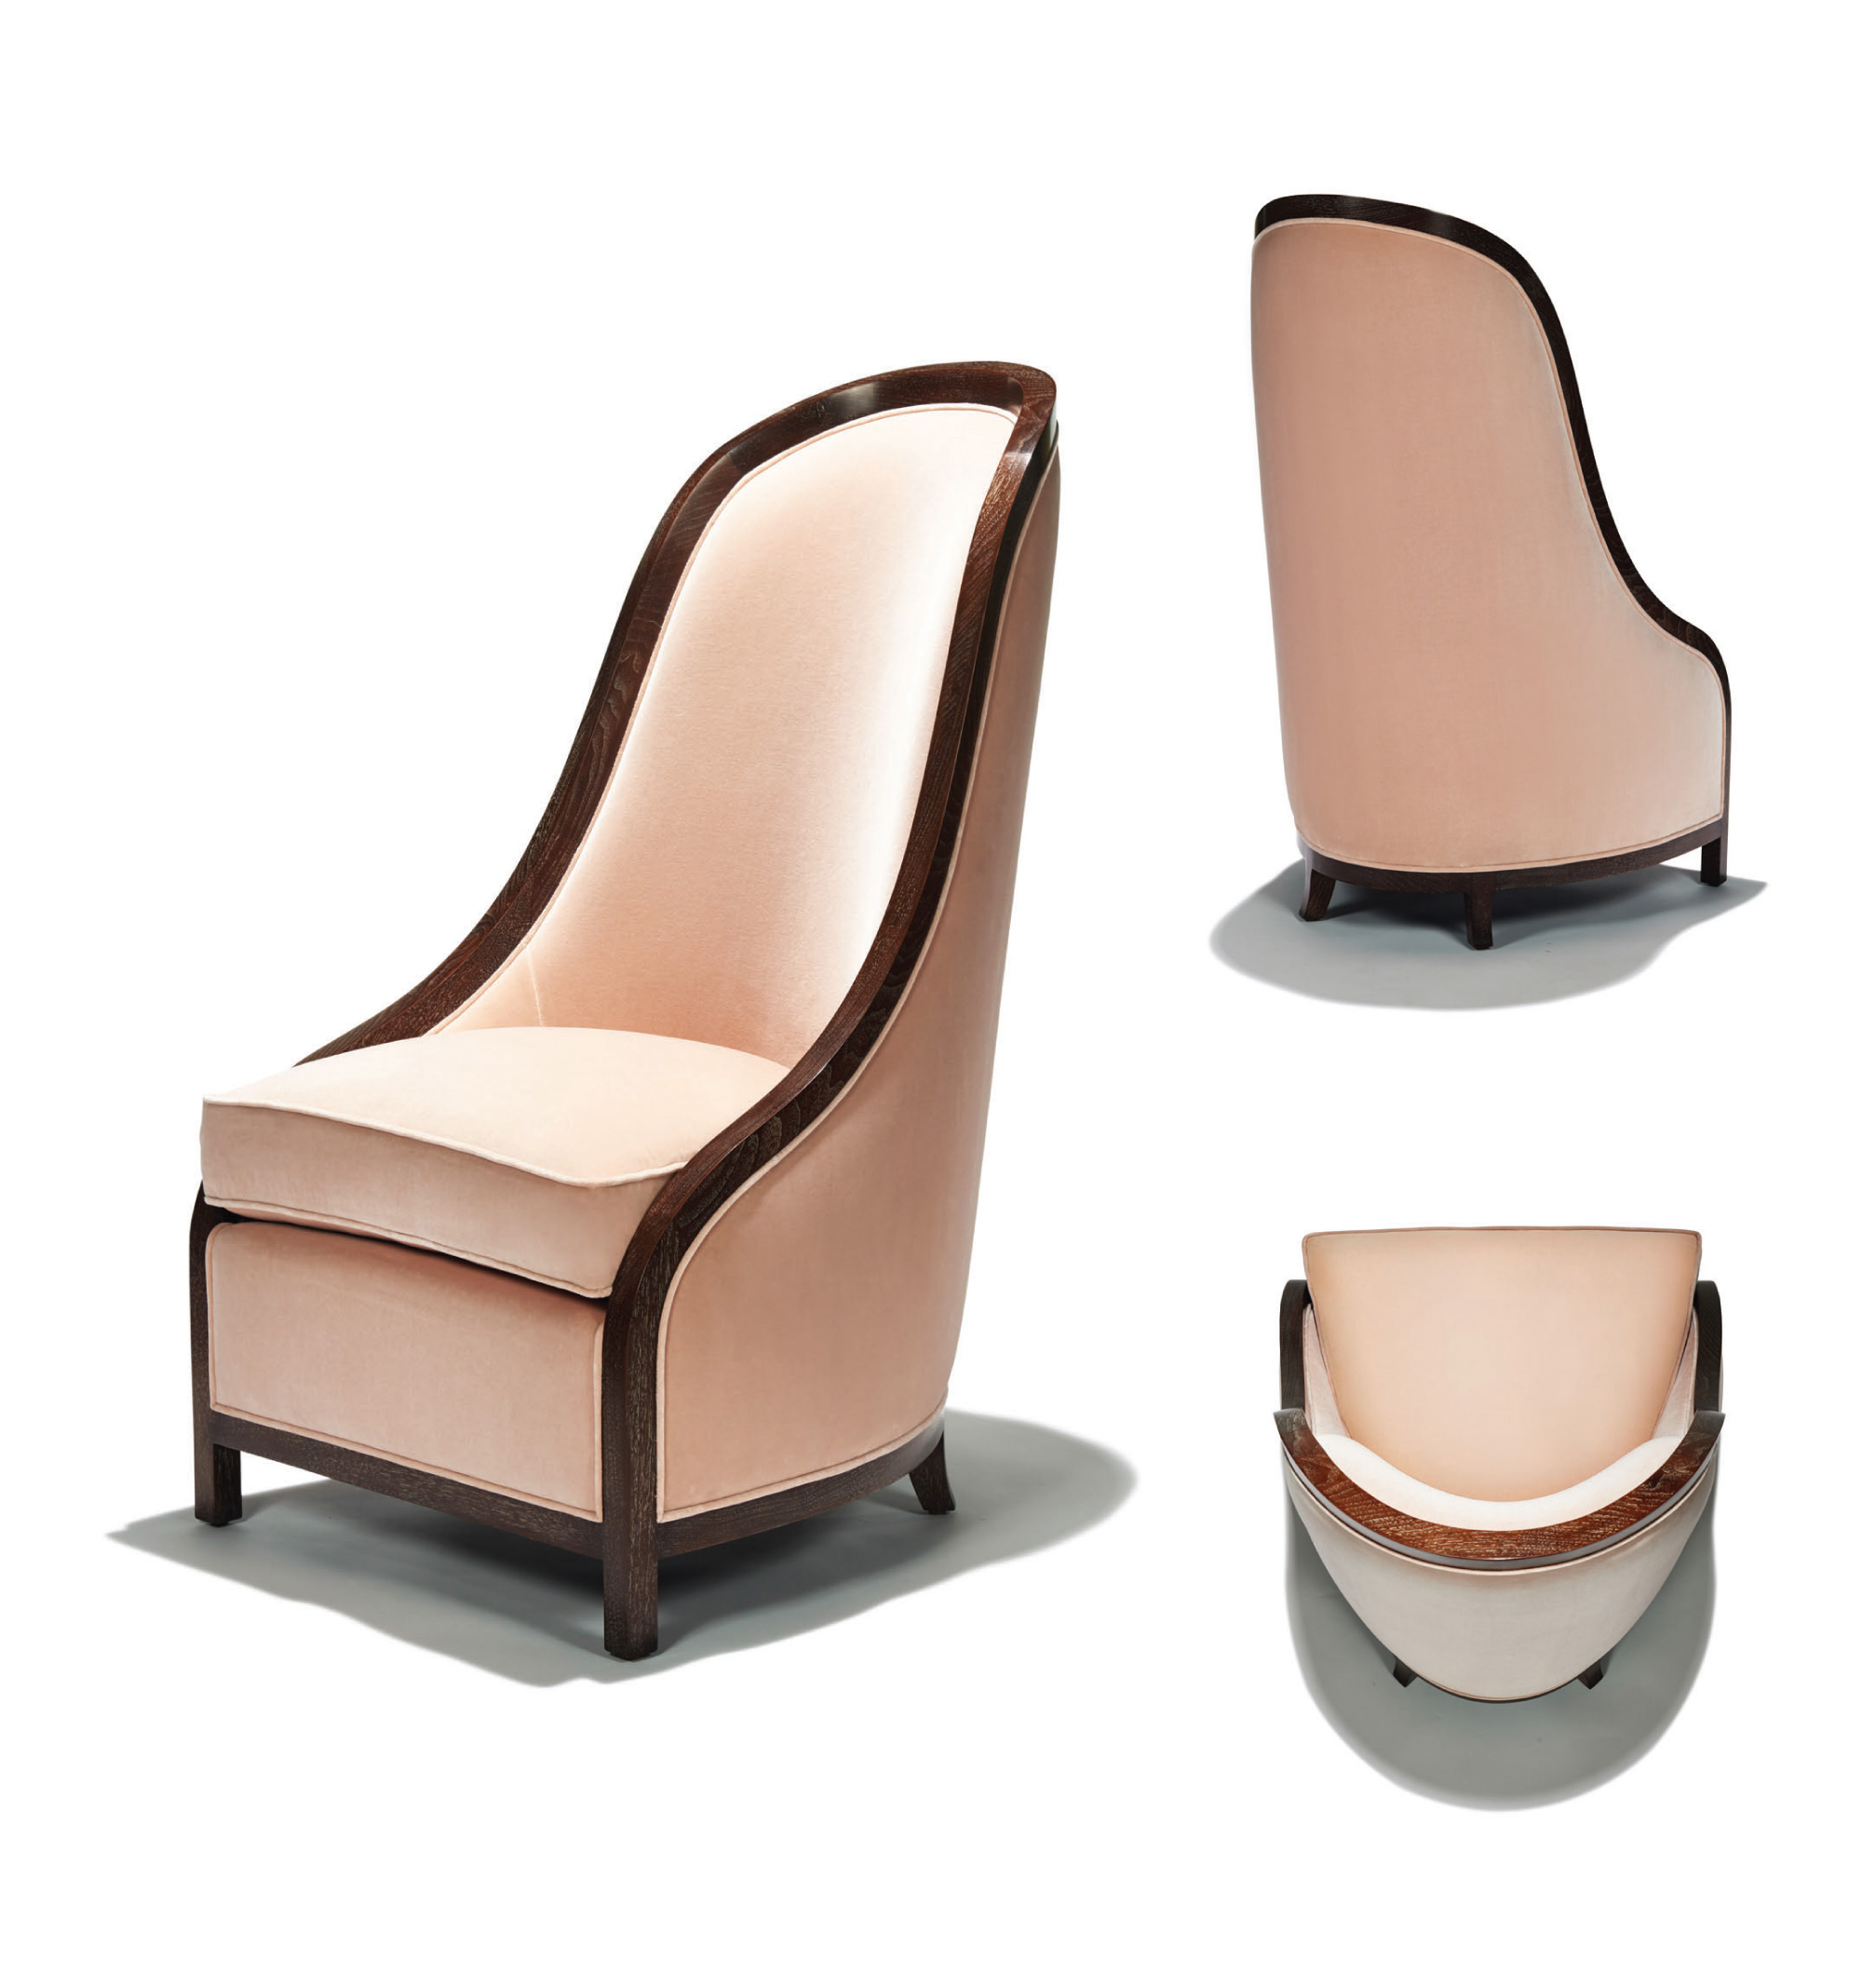 CAMEO HIGH BACK CHAIR